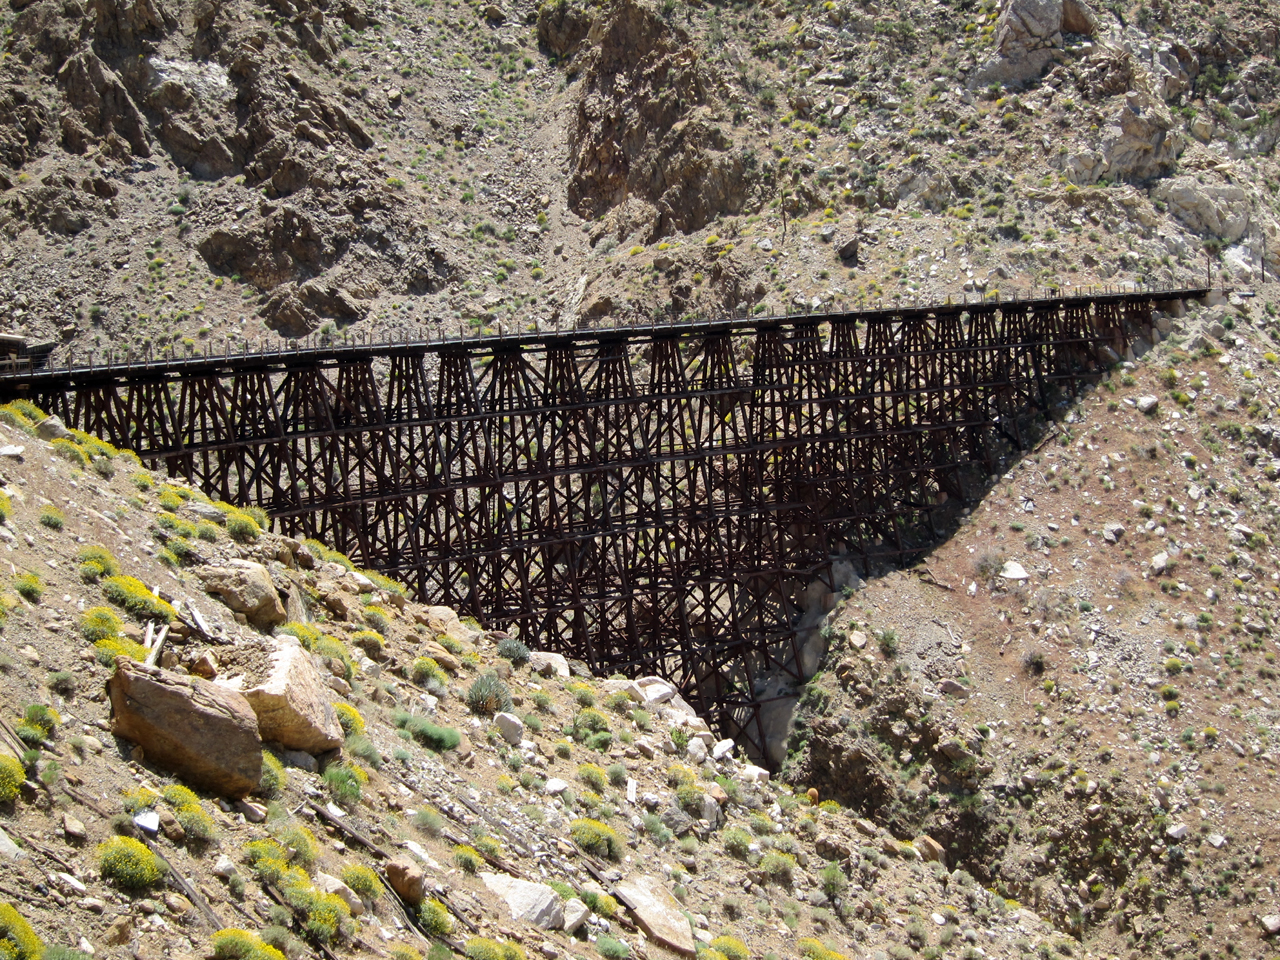 Another view of Goat Canyon Trestle